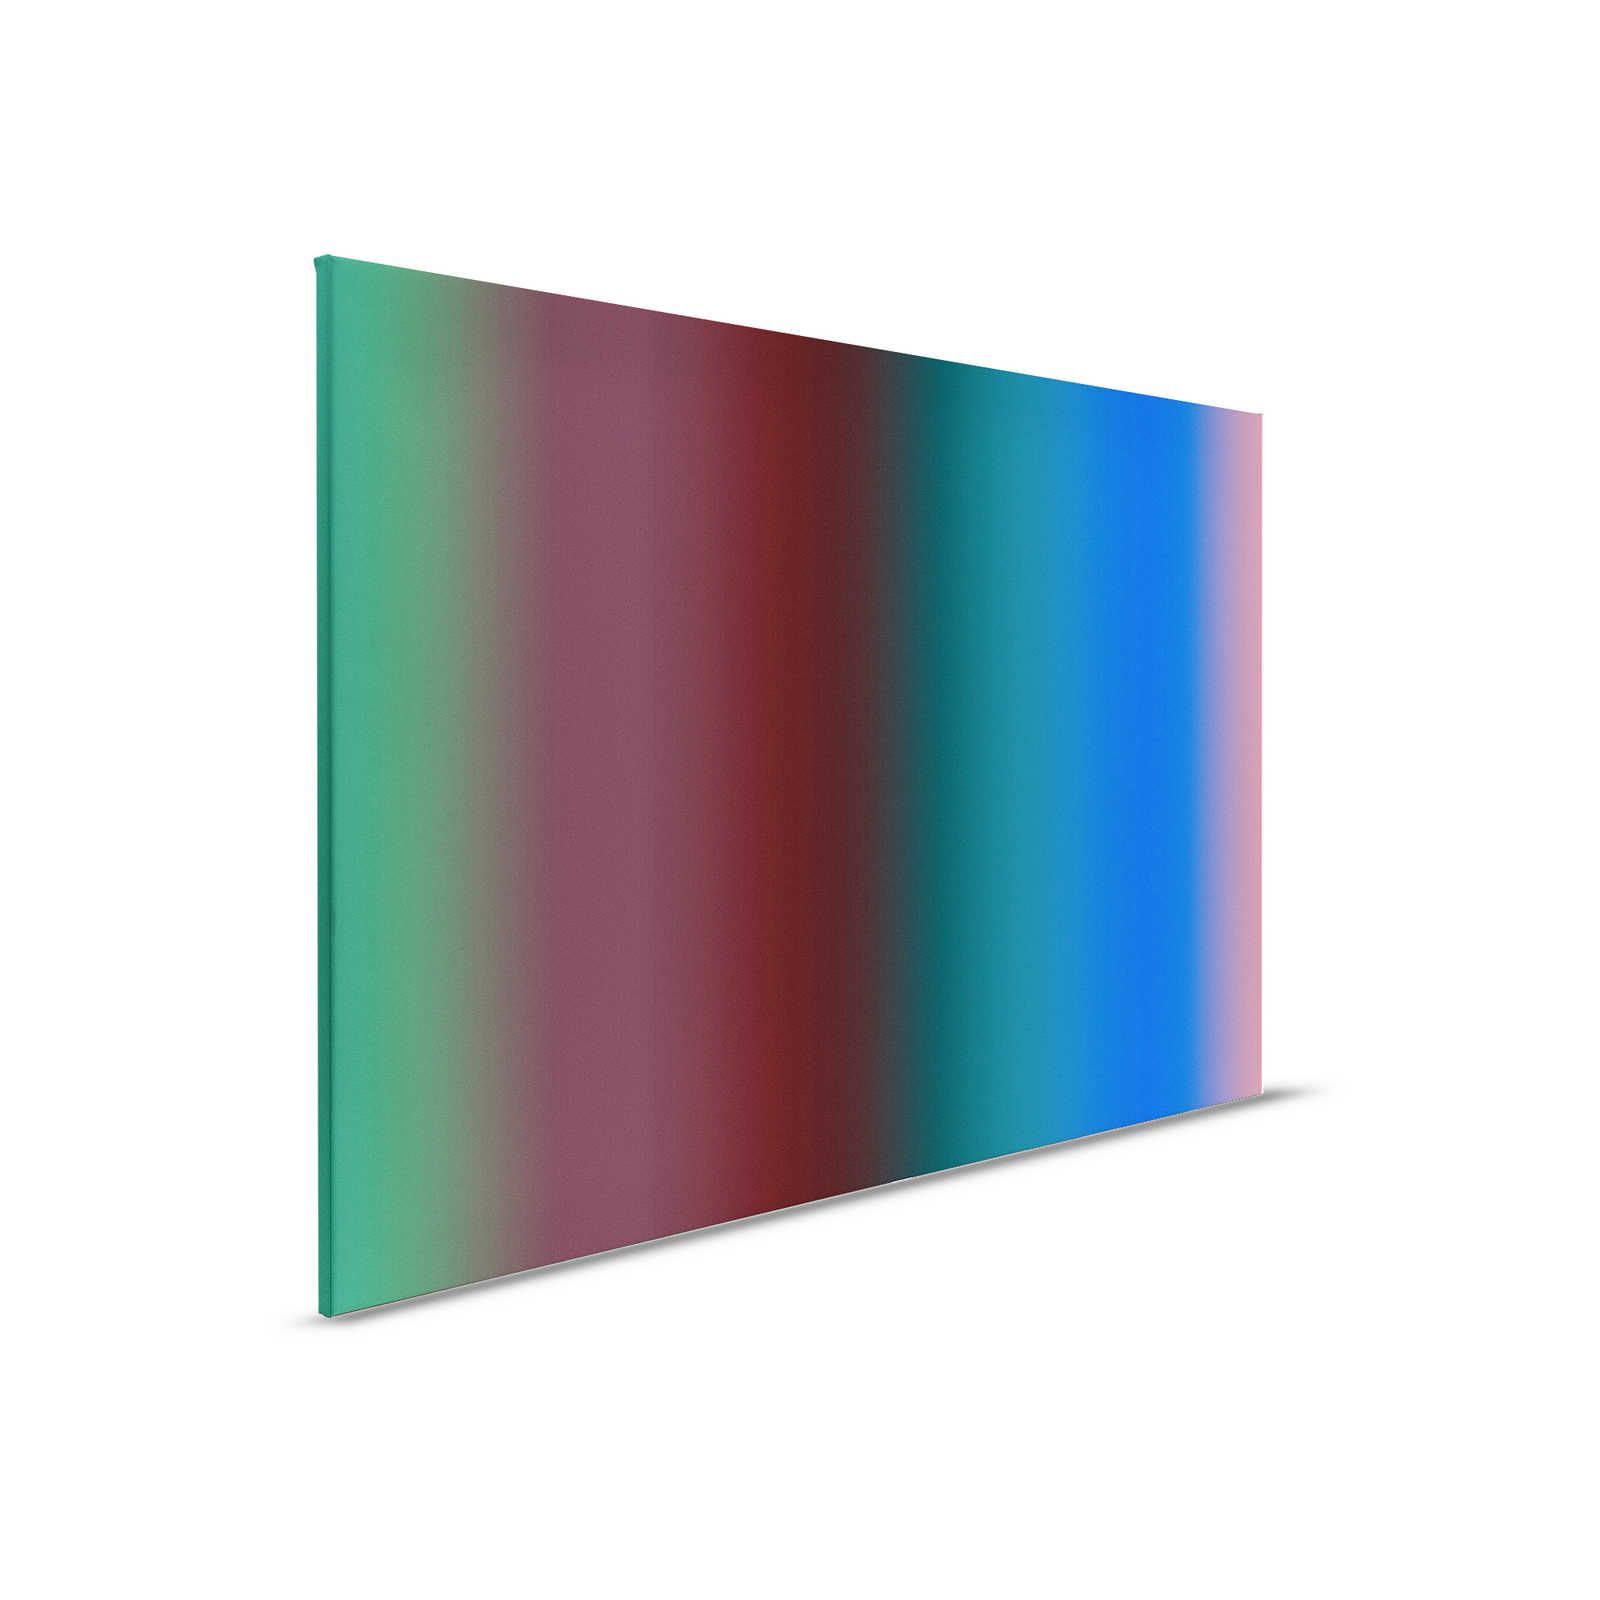         Over the Rainbow 2 - Gradient Canvas Painting Colourful Stripe Design - 0.90 m x 0.60 m
    